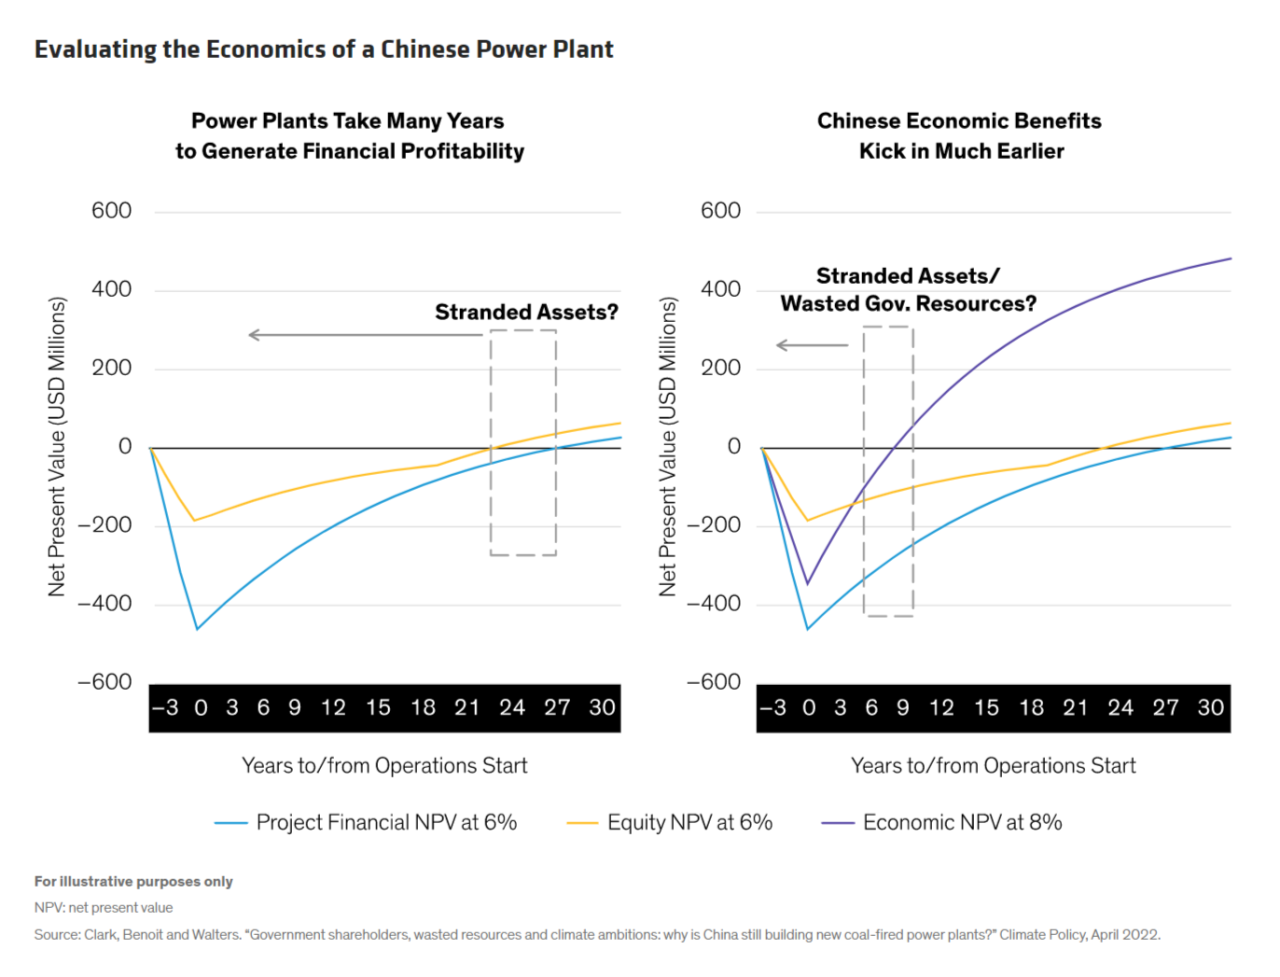 Evaluating the Economics of a Chinese Power Plant graphs